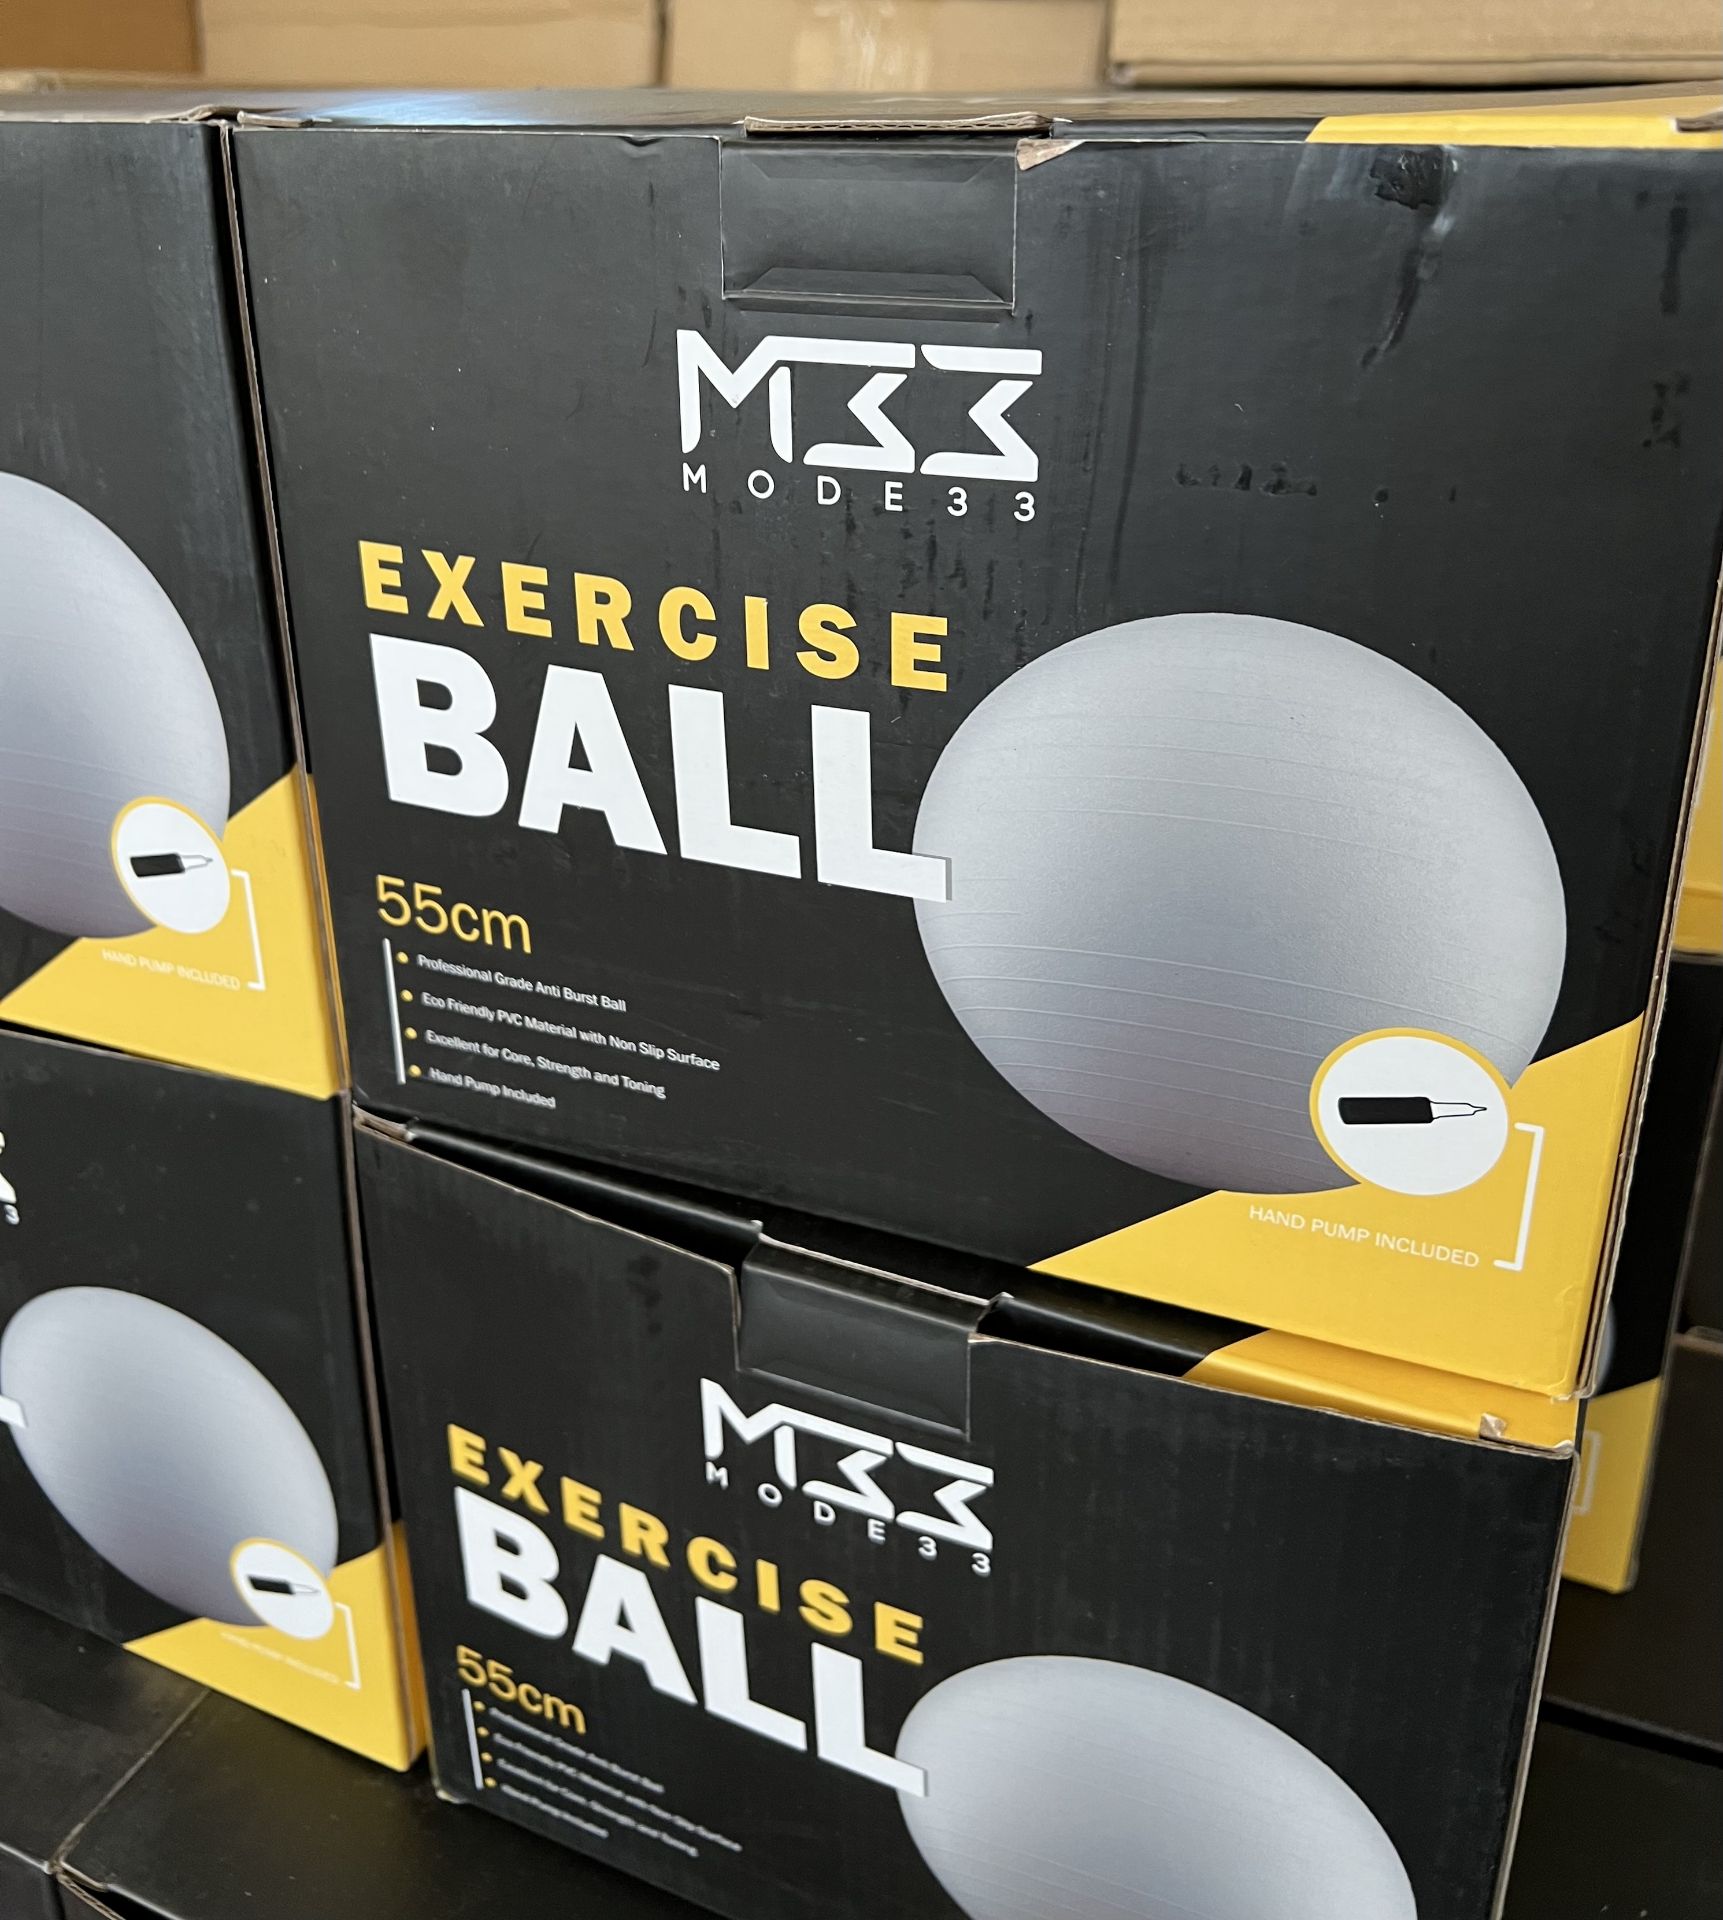 10 x Mode33 Exercise / Yoga / Pregnancy Ball - 55cm (NEW) - RRP £169.90 ! - Image 6 of 11